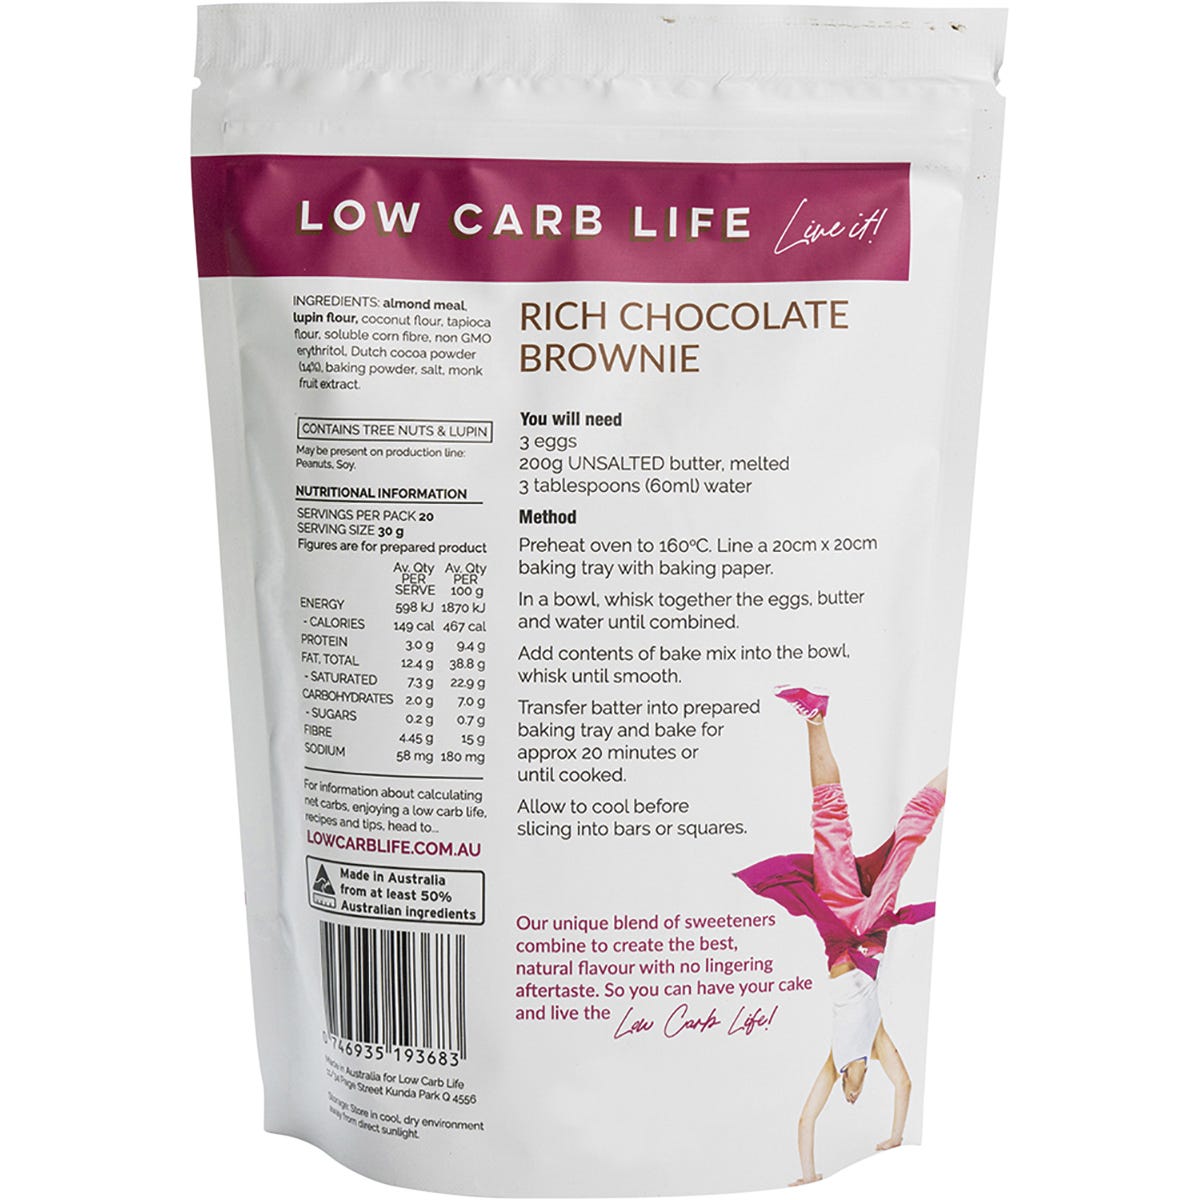 Low Carb Life Rich Chocolate Brownies Keto Bake Mix